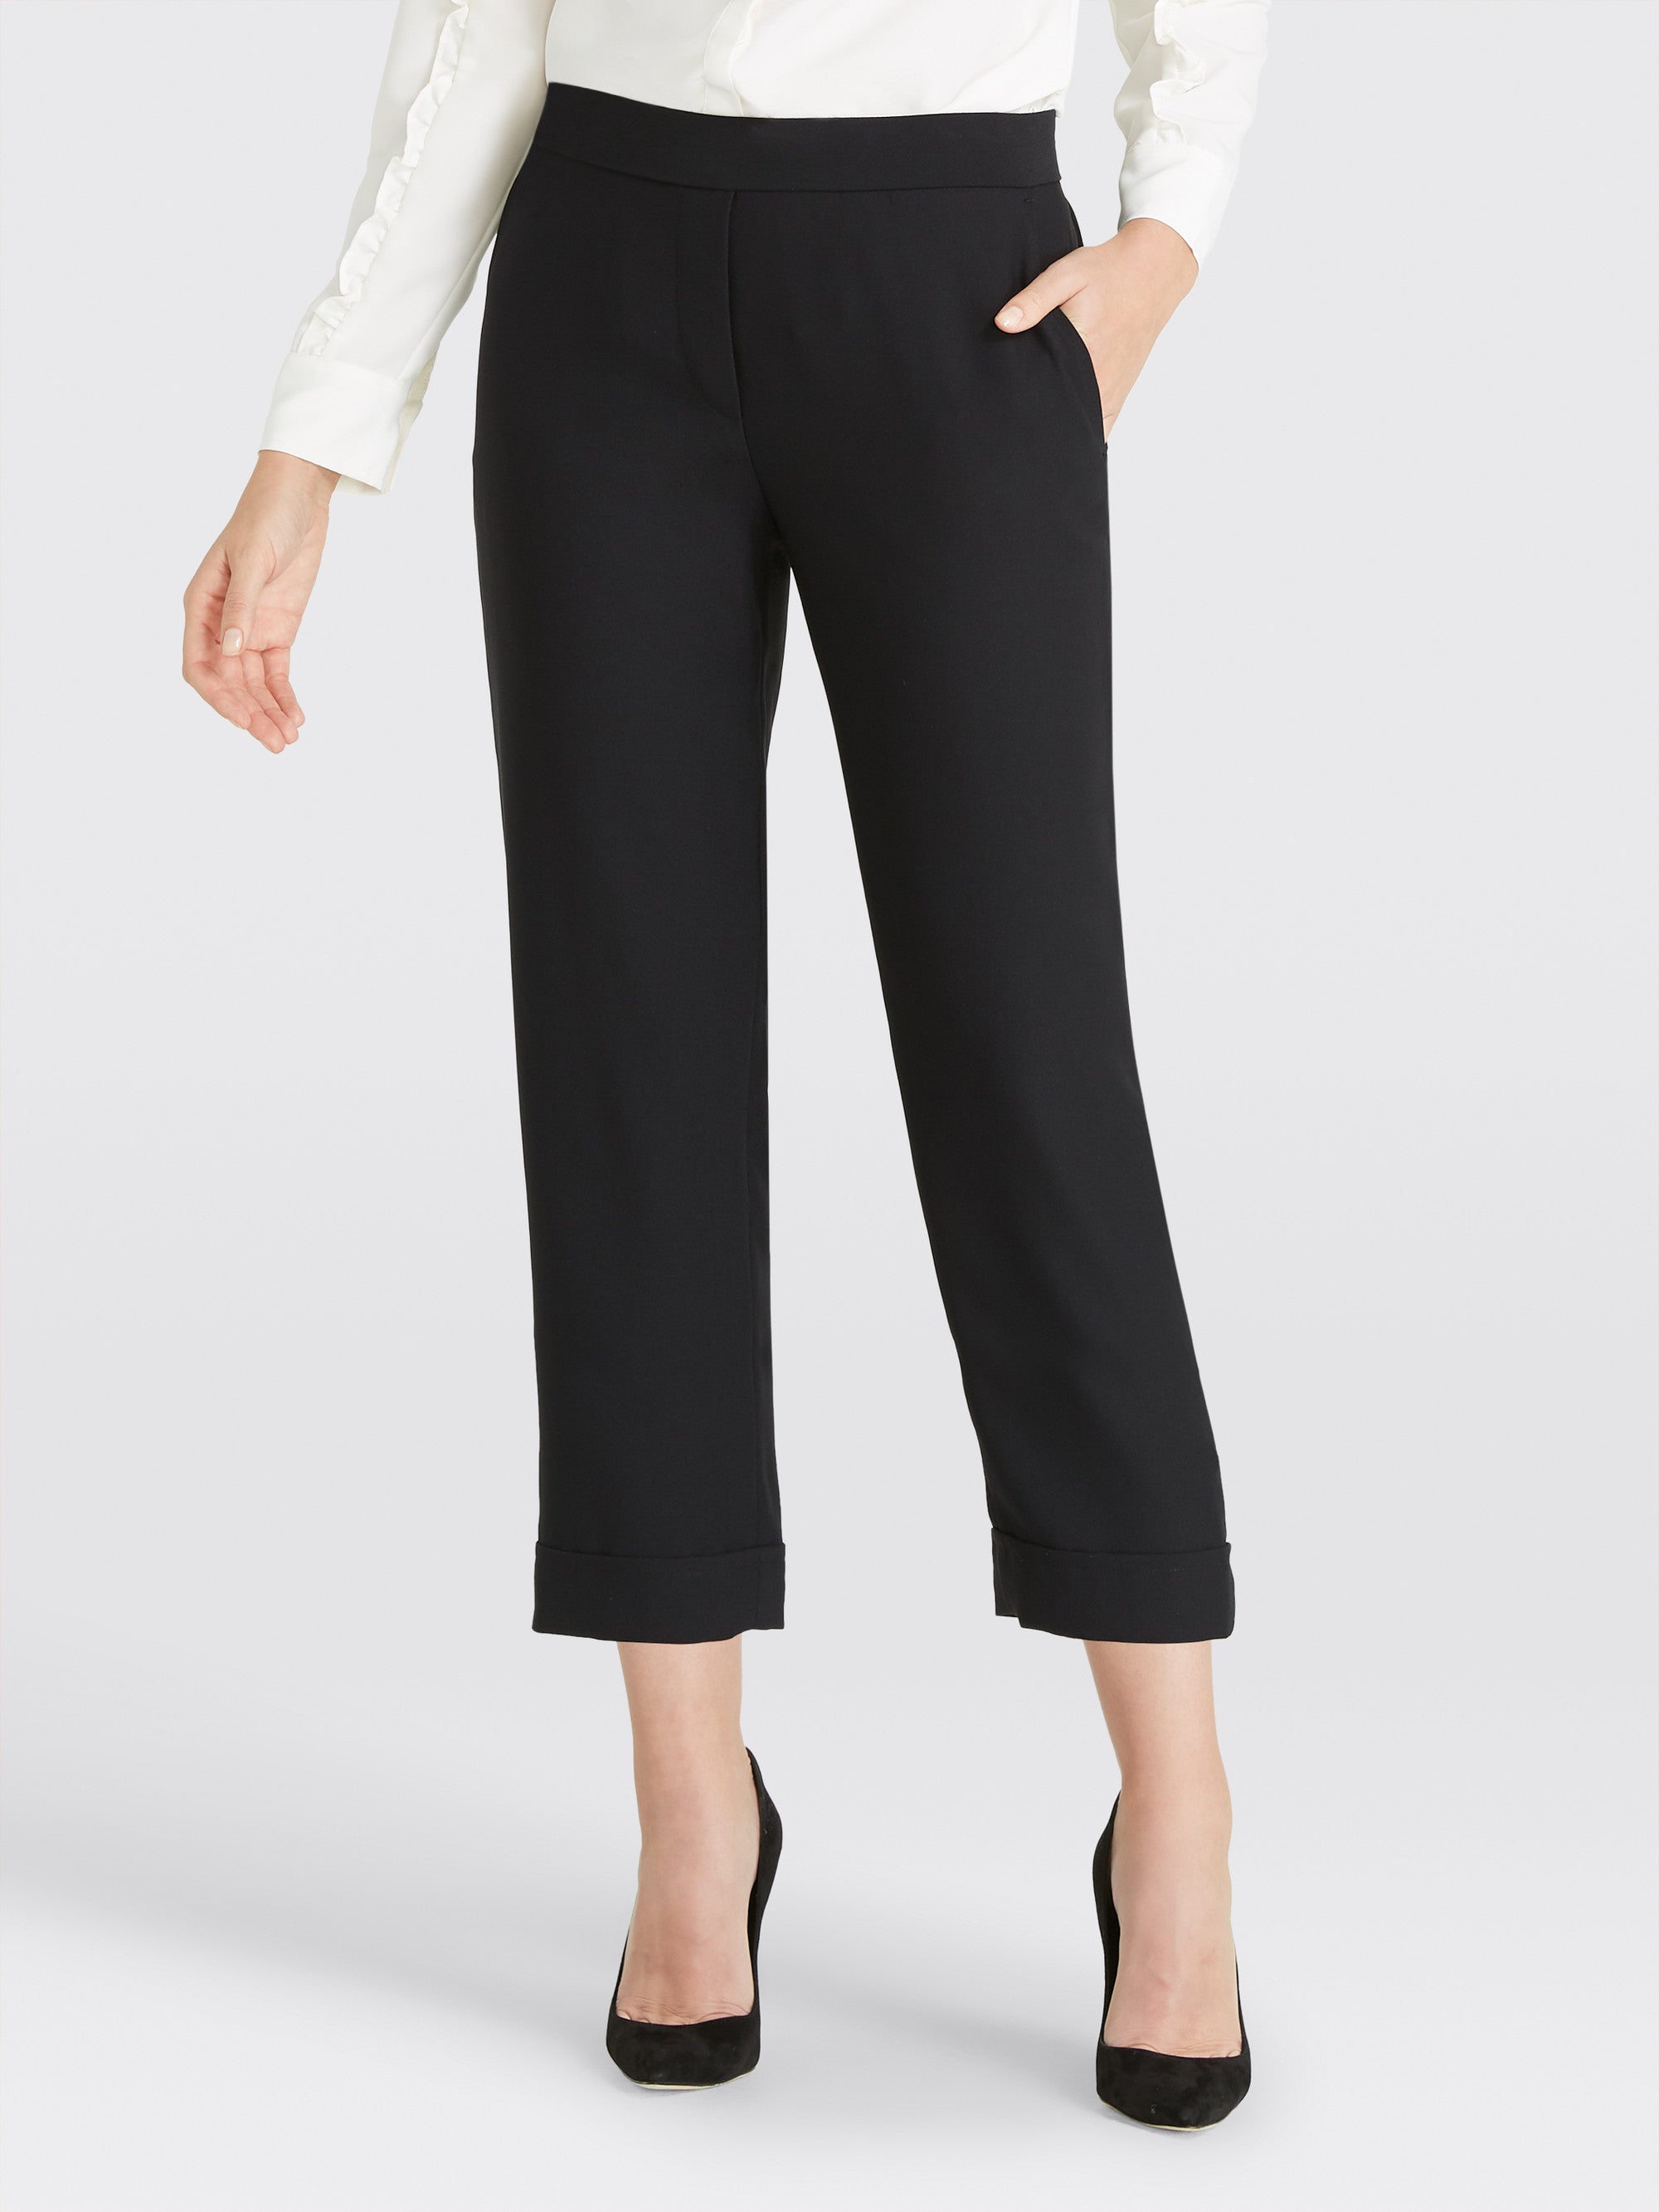 Ankle Cuff Pant